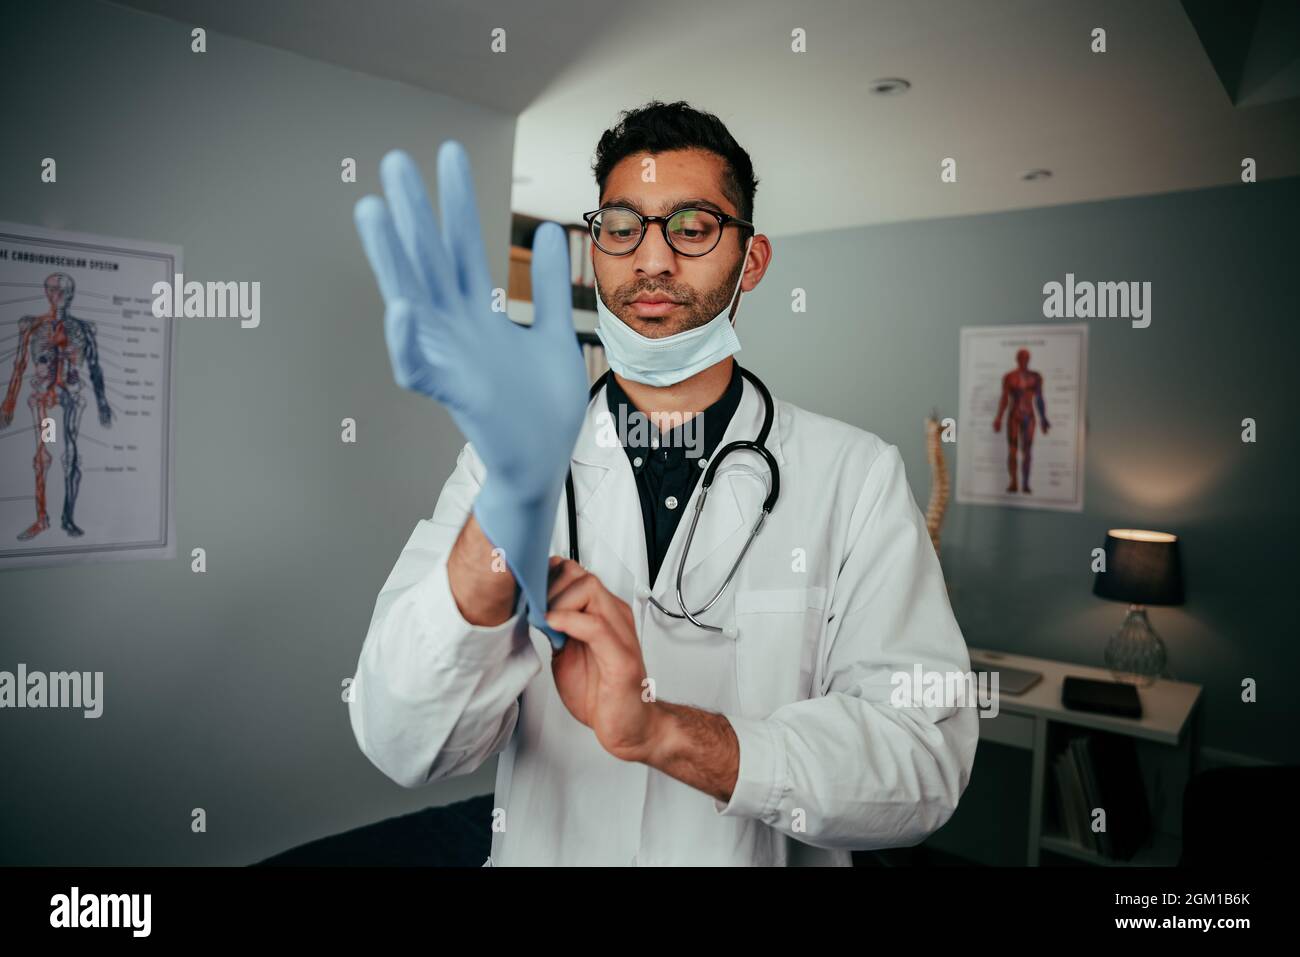 Mixed race male doctor standing in office wearing surgical gloves Stock Photo